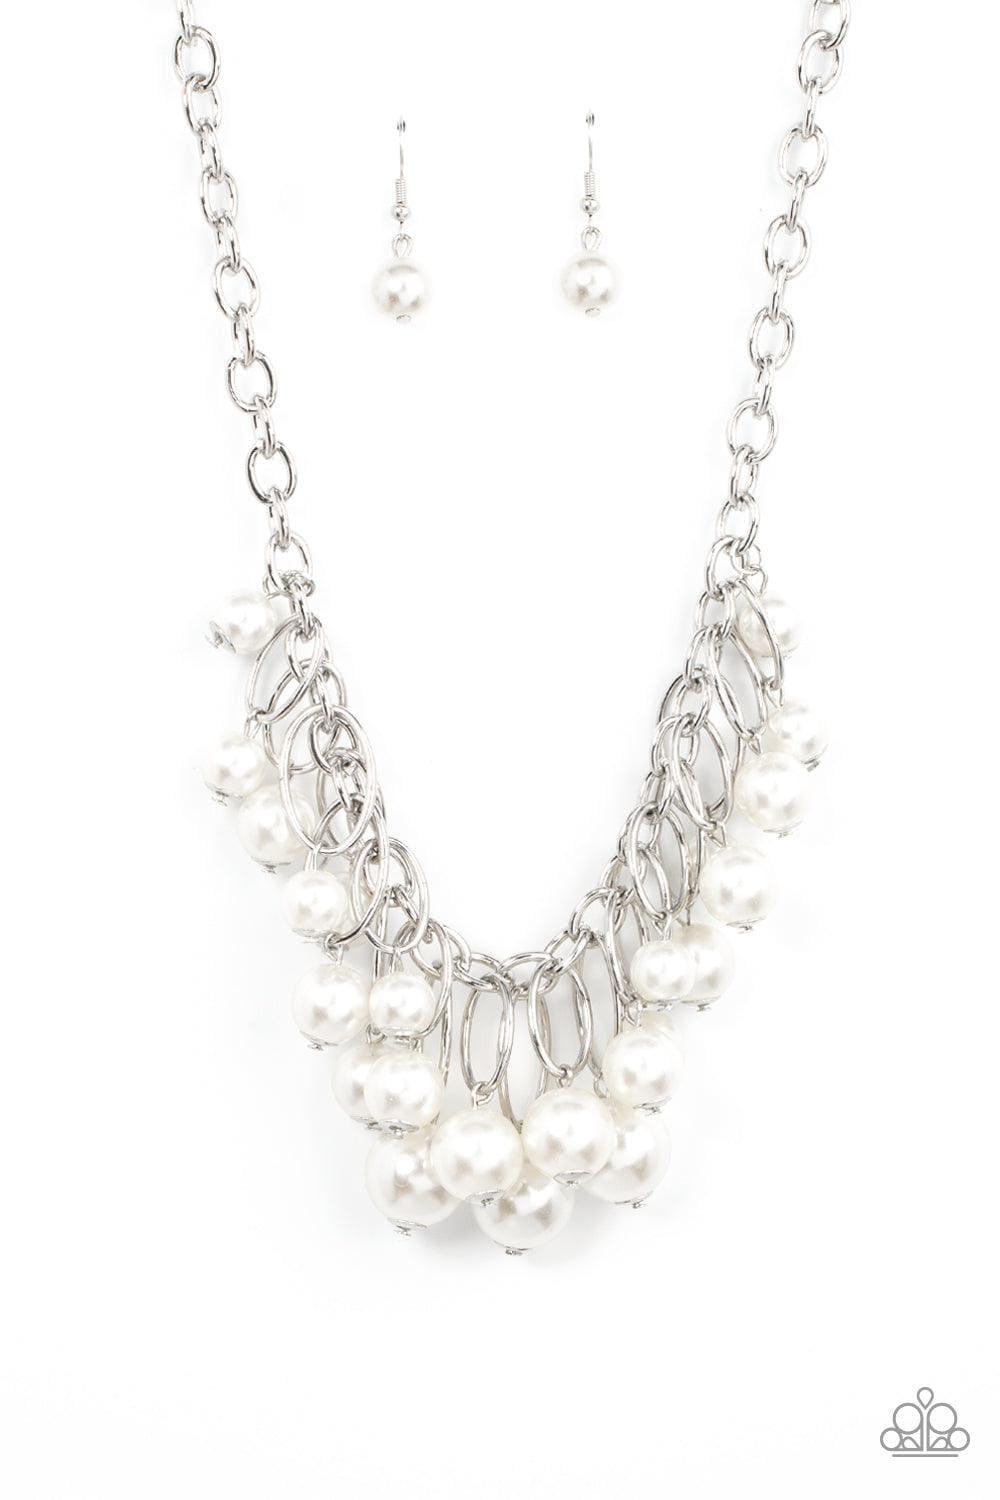 Paparazzi Accessories - Powerhouse Pose - White Necklace - Bling by JessieK